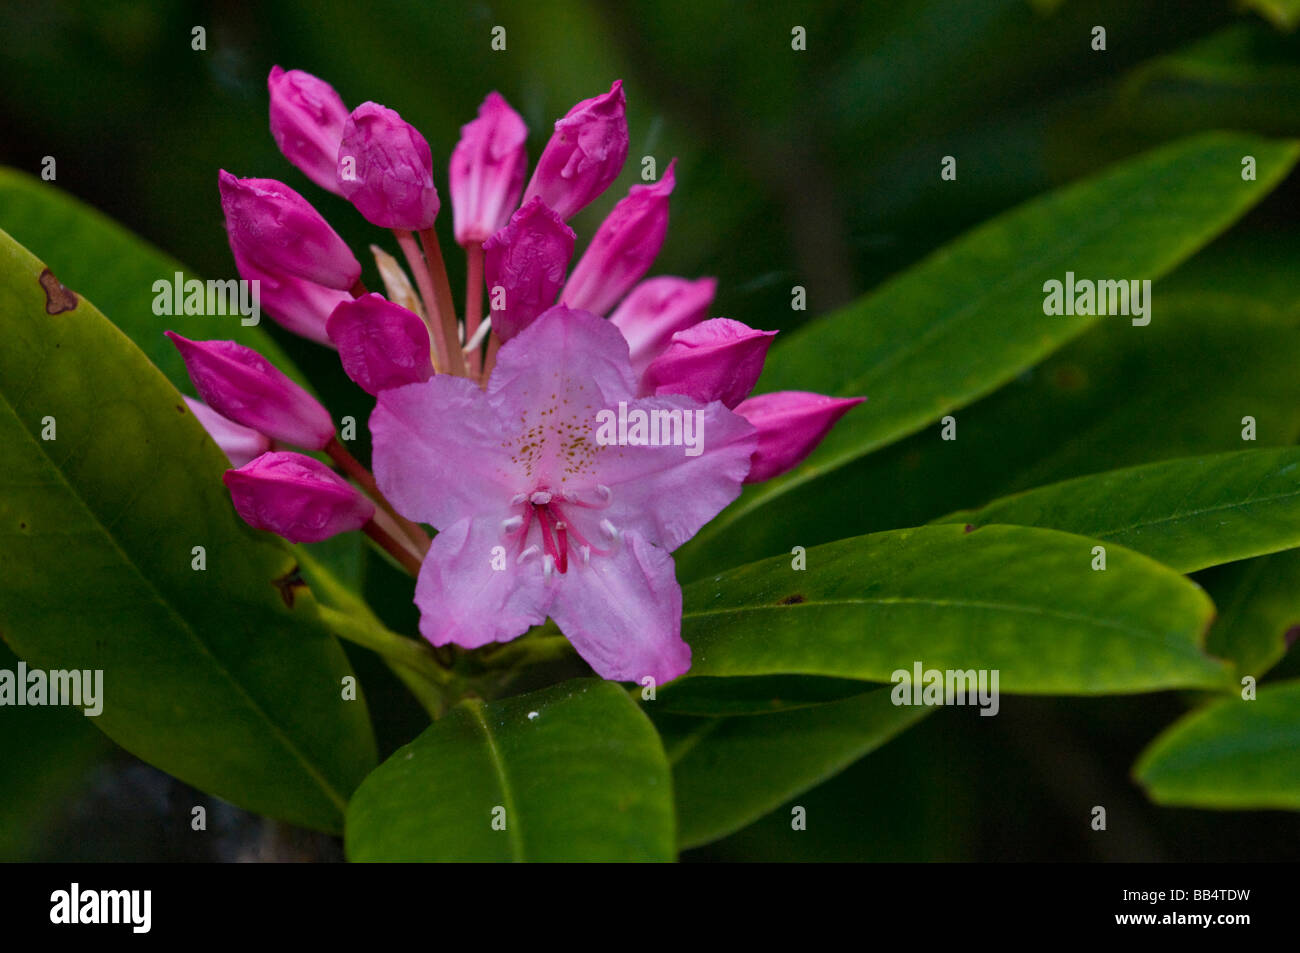 USA, WA, Whidbey Island, Fort Ebey State Park. Native rhododendron  blooms brighten forest in late spring. Stock Photo